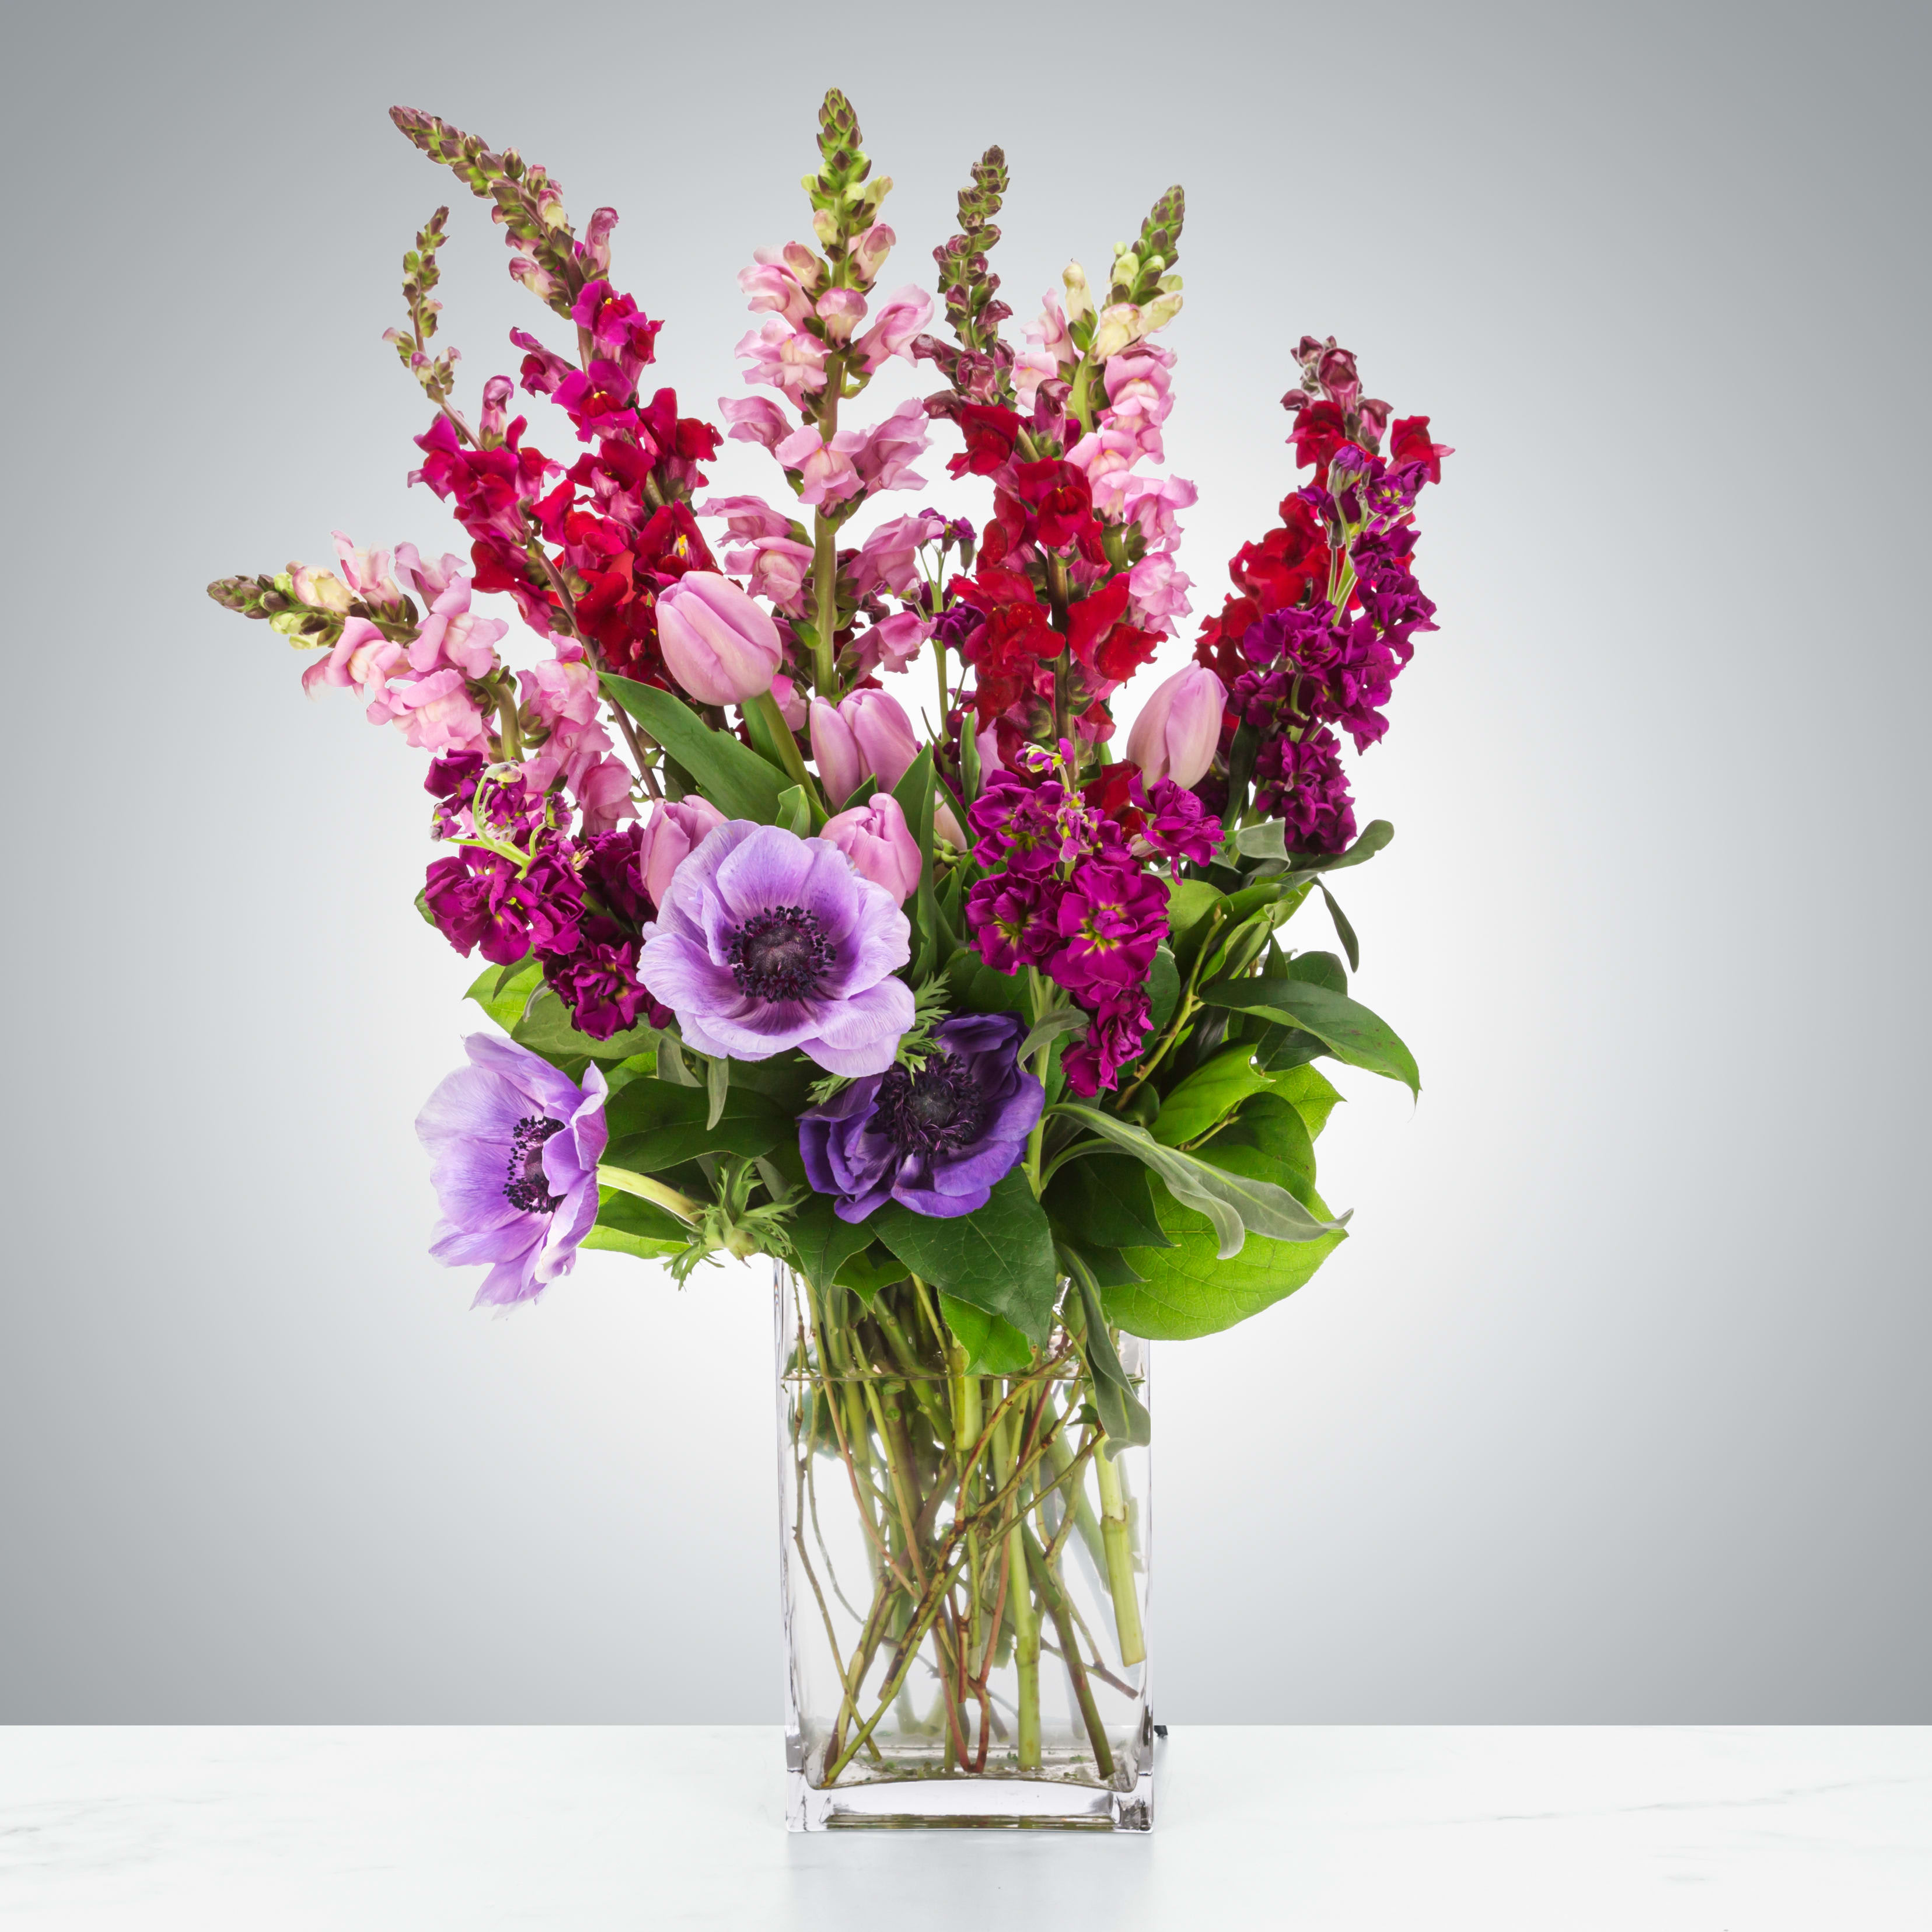 Amethyst Magic by BloomNation™ - Amethysts can come in a variety of beautiful purple colors just like this arrangement. Featuring Anemones, tulips, and snapdragons, this arrangement makes a beautiful February birthday present or a lovely congratulations gift.  